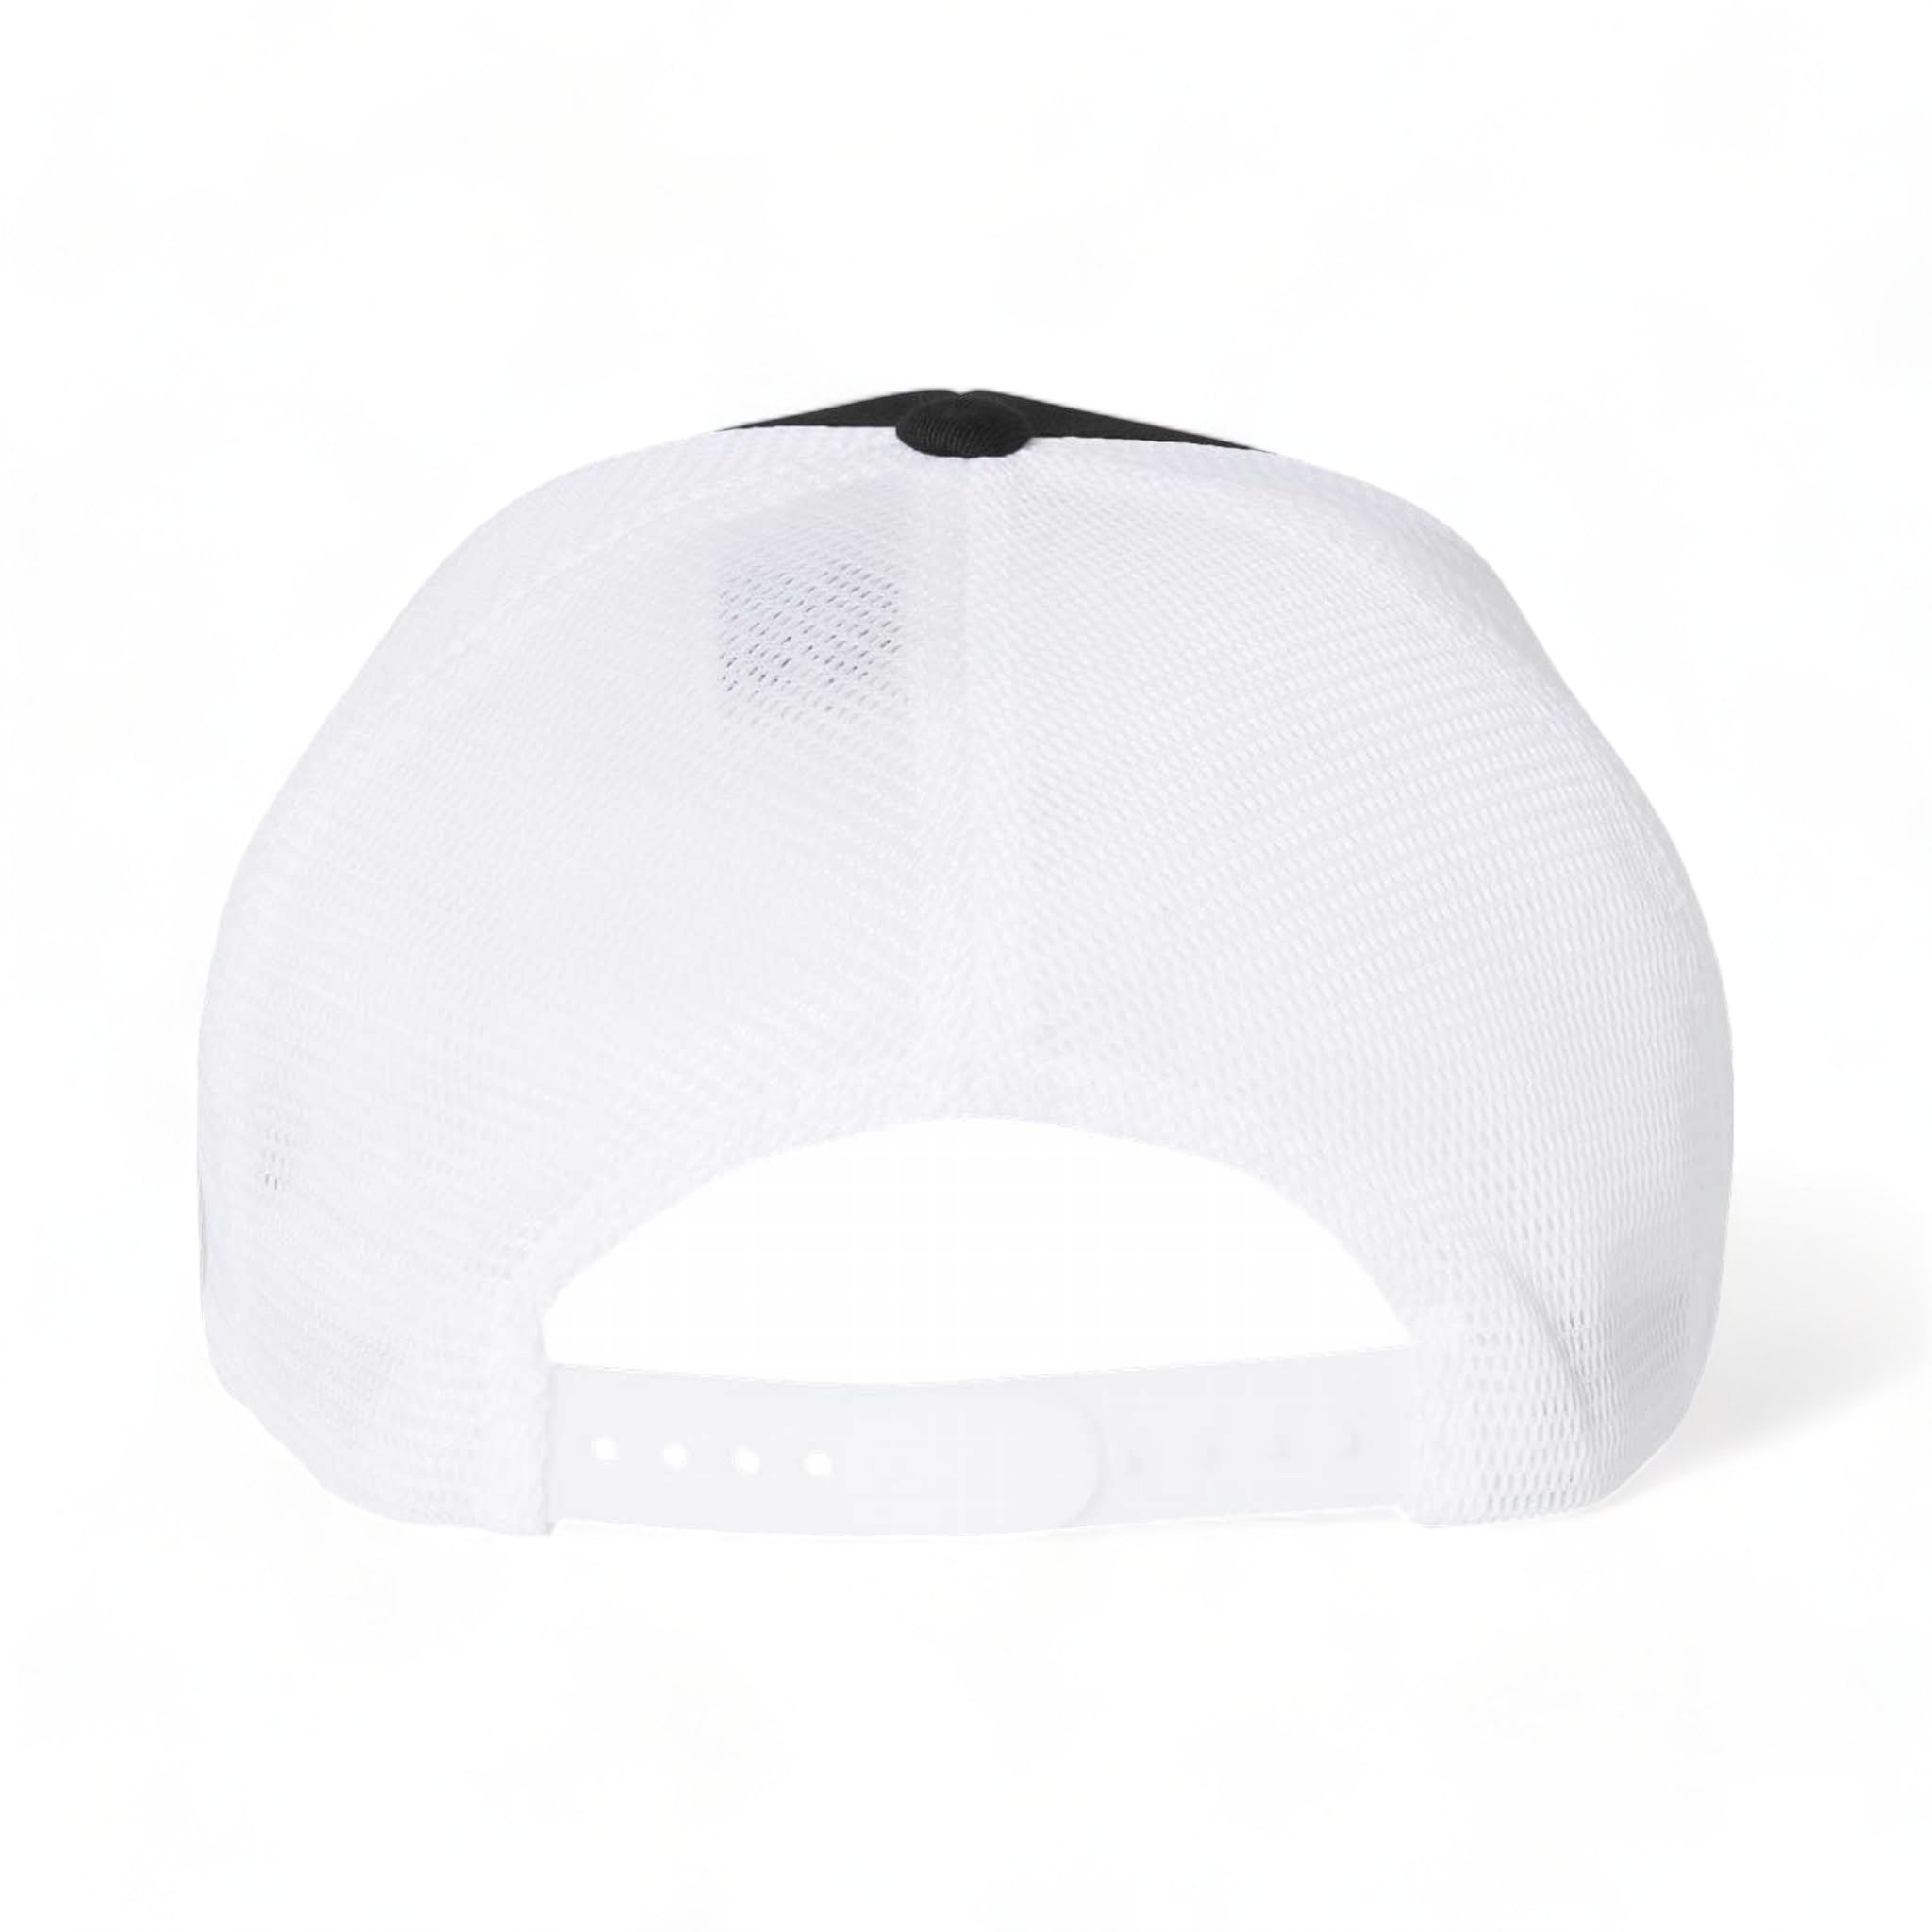 Back view of Flexfit 110M custom hat in black and white